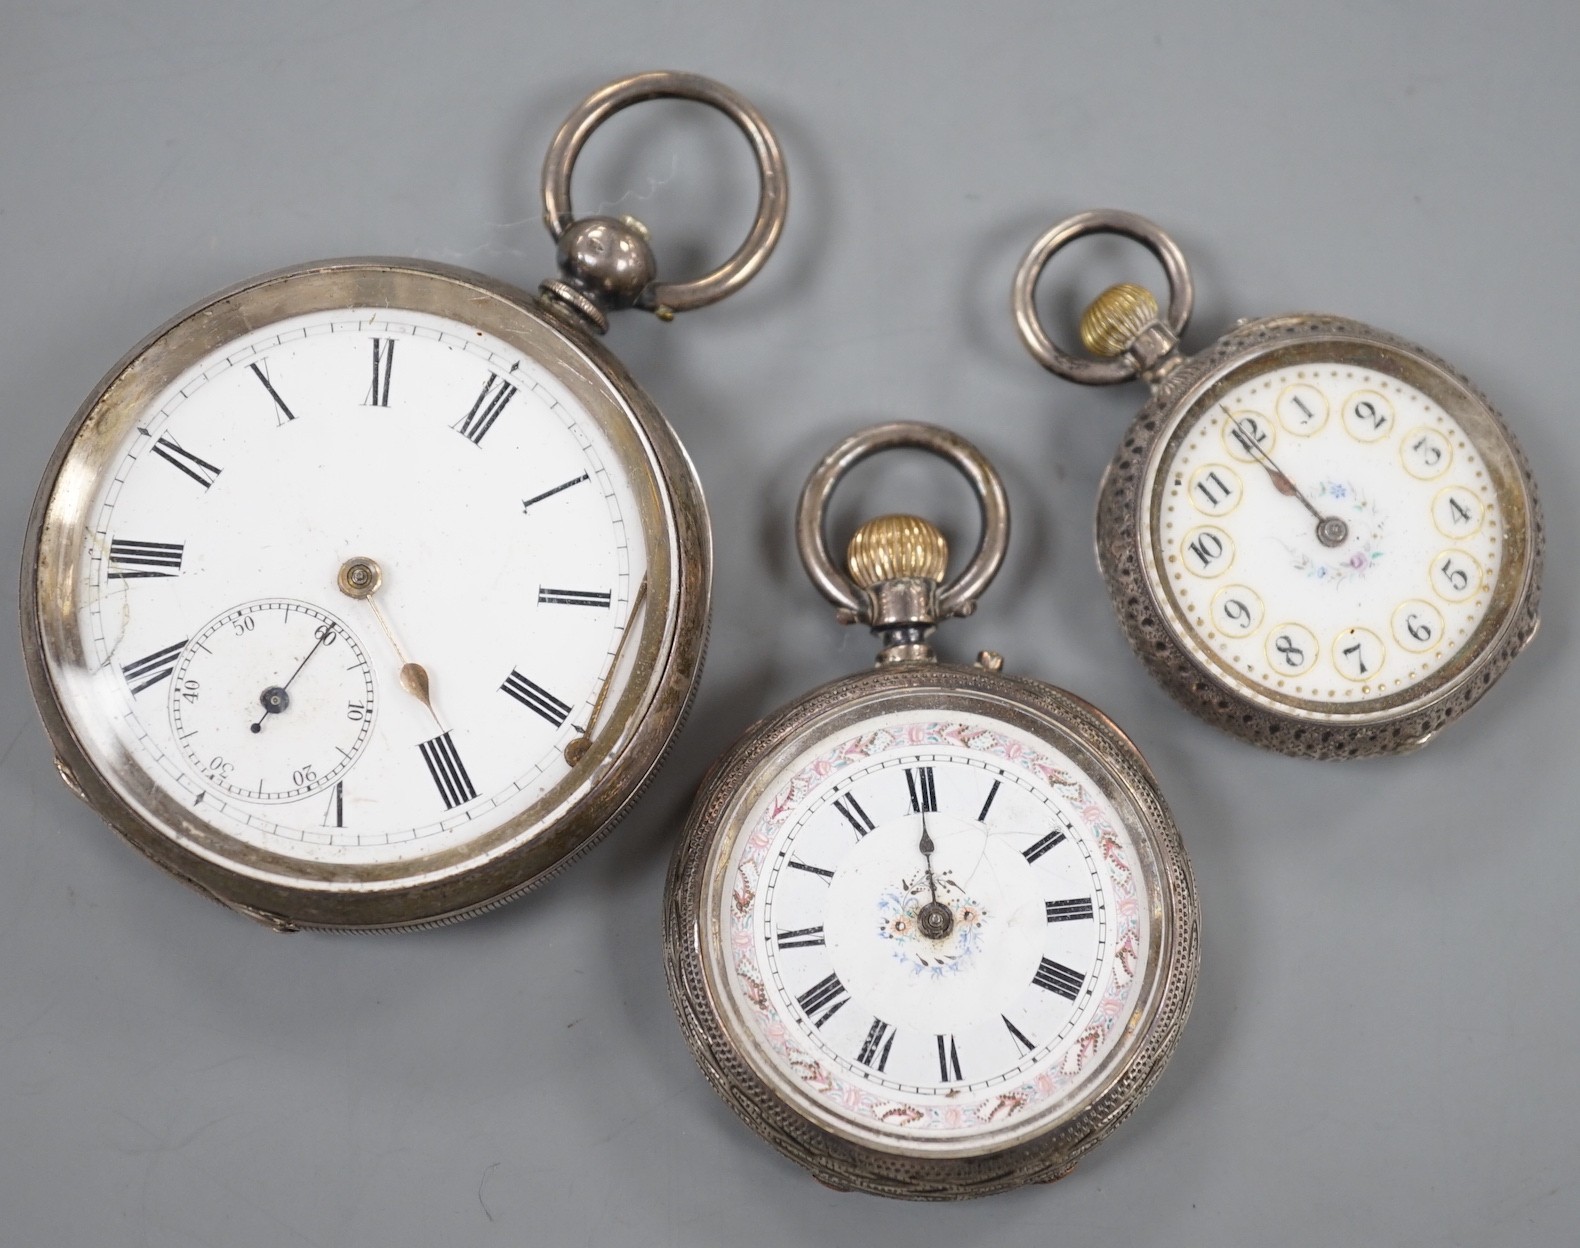 A Swiss 935 white metal open faced pocket watch and two fob watches=, silver a 935 white metal.